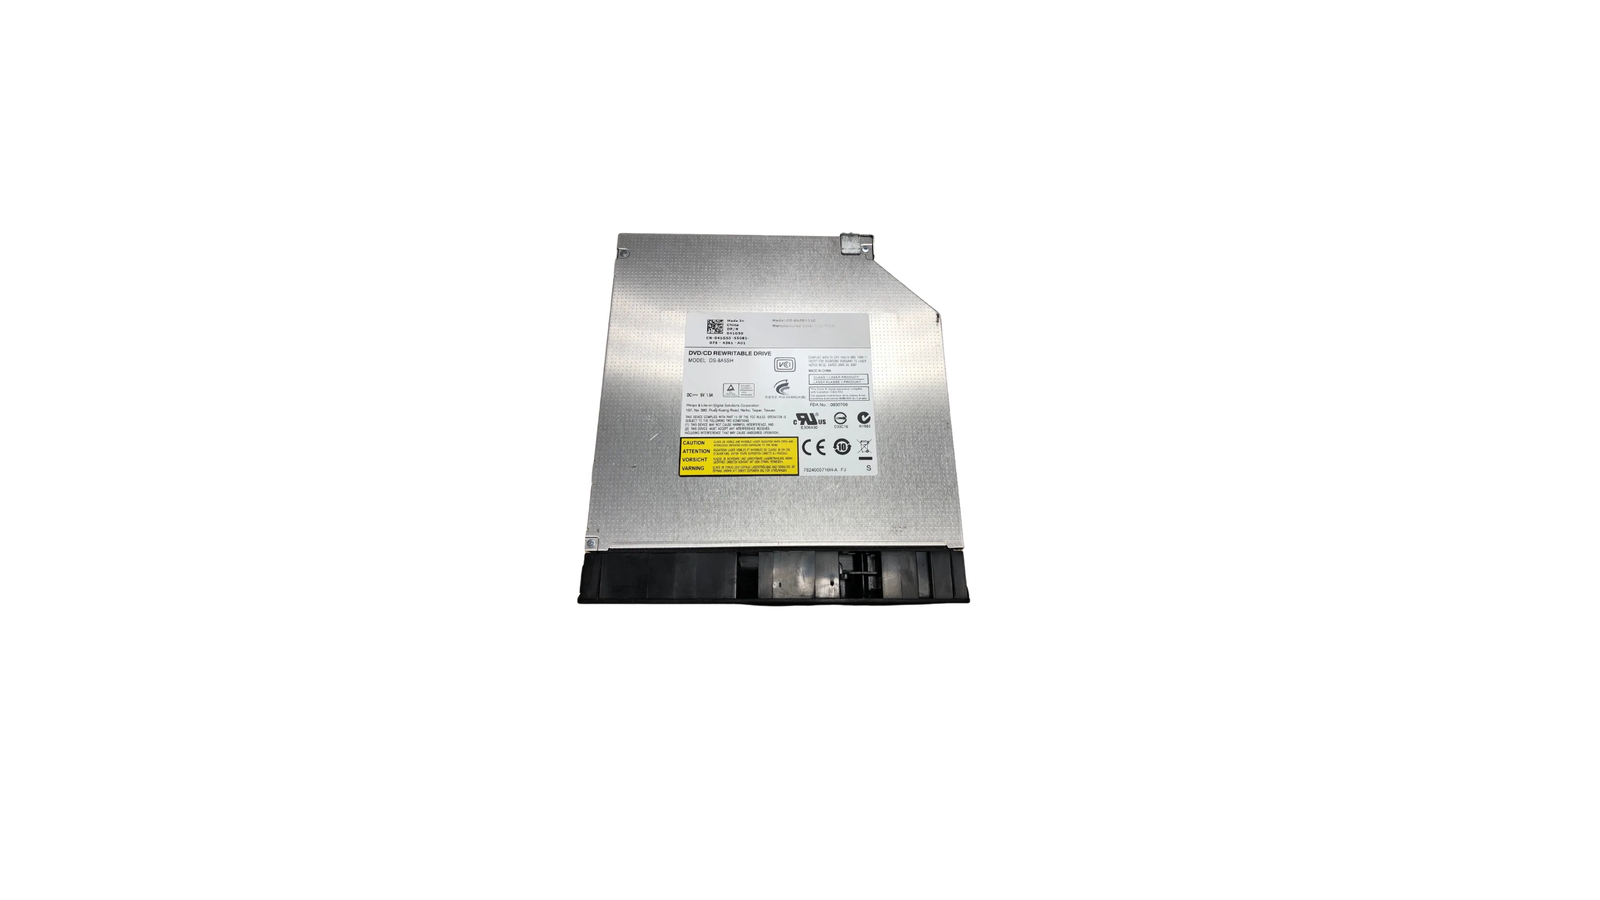 041G50 DVD-RW drive for Dell Inspiron N5010